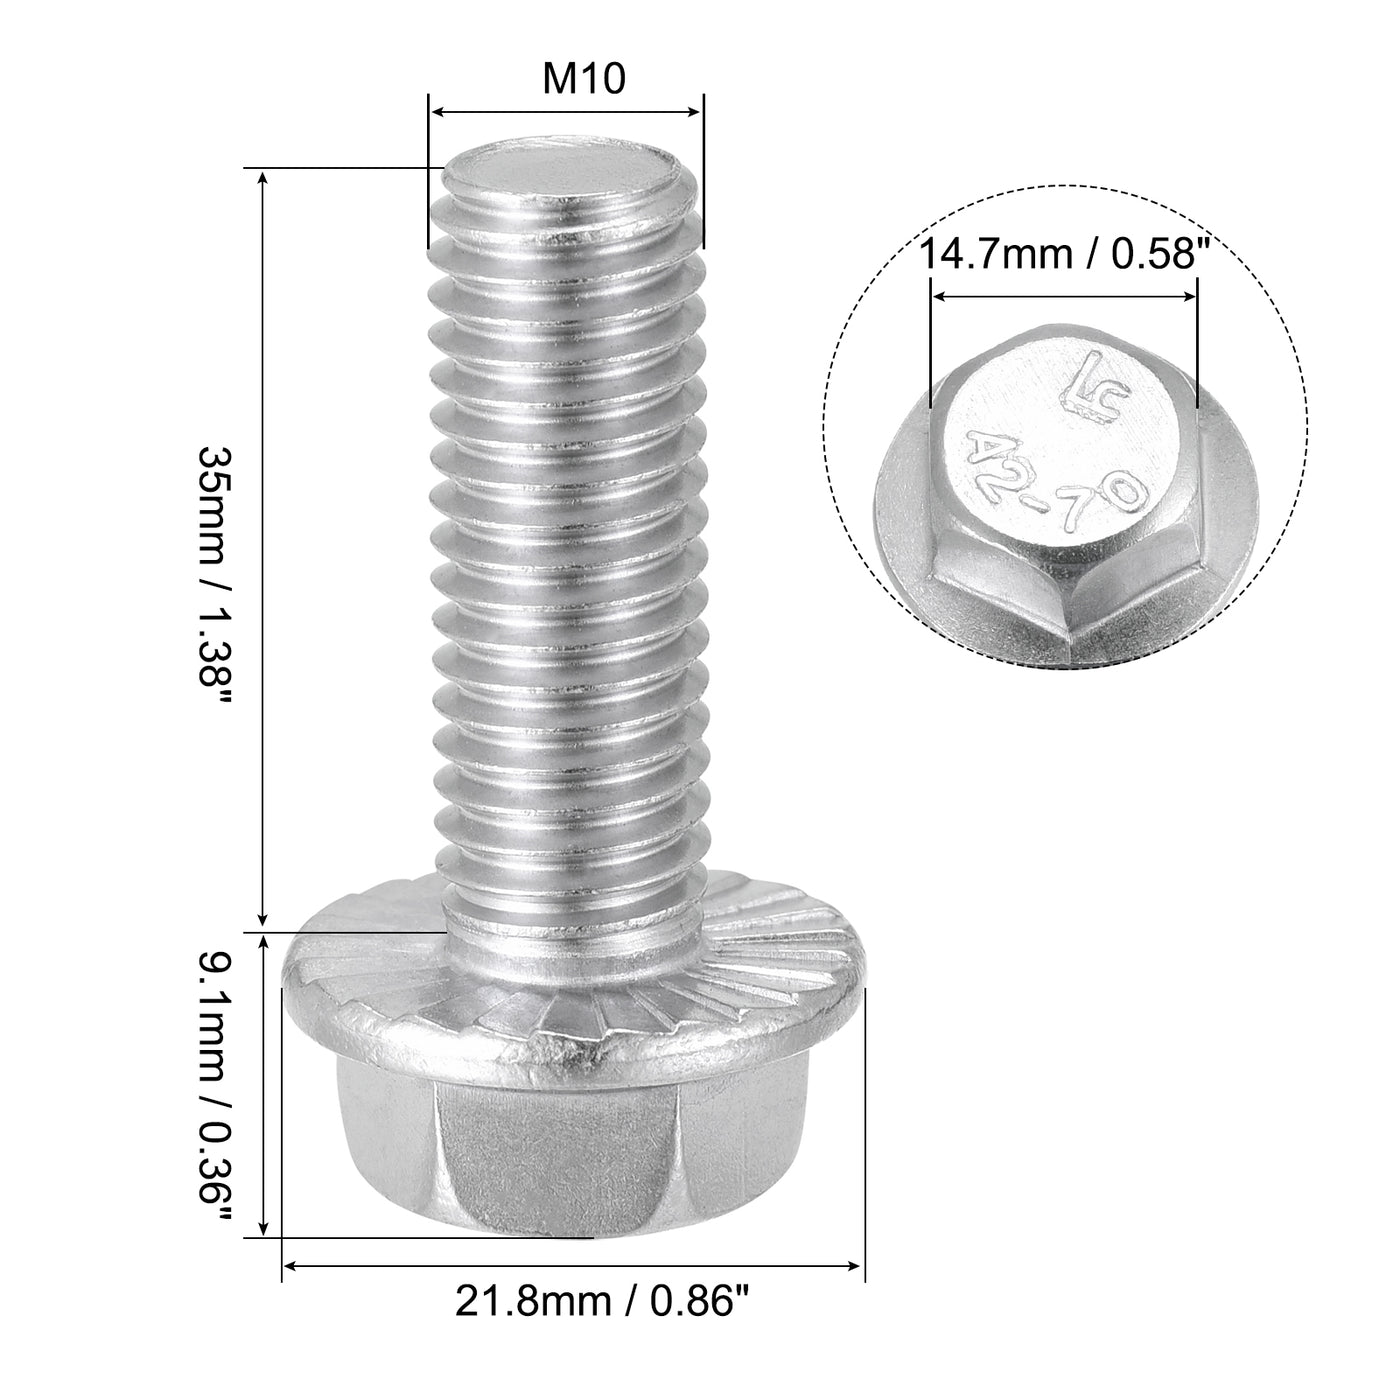 Uxcell Uxcell M10x60mm Hex Serrated Flange Bolts Screws Metric Thread 304 Stainless Steel 6pcs